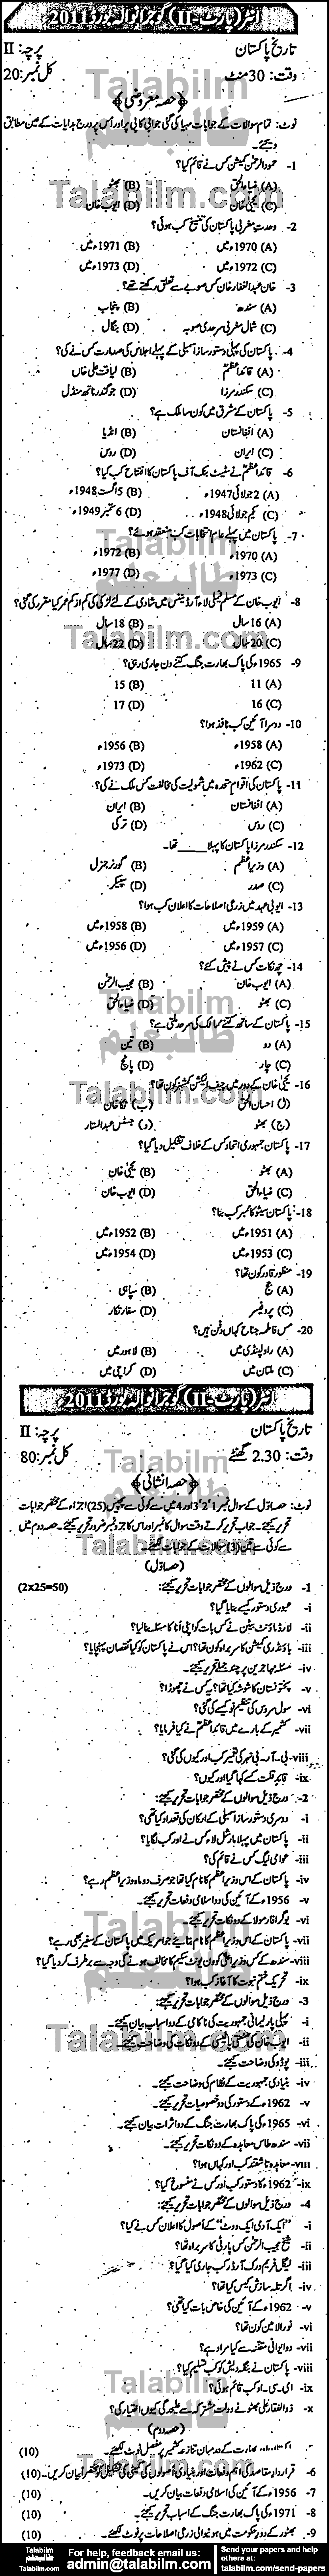 Pakistan History 0 past paper for Group-I 2011